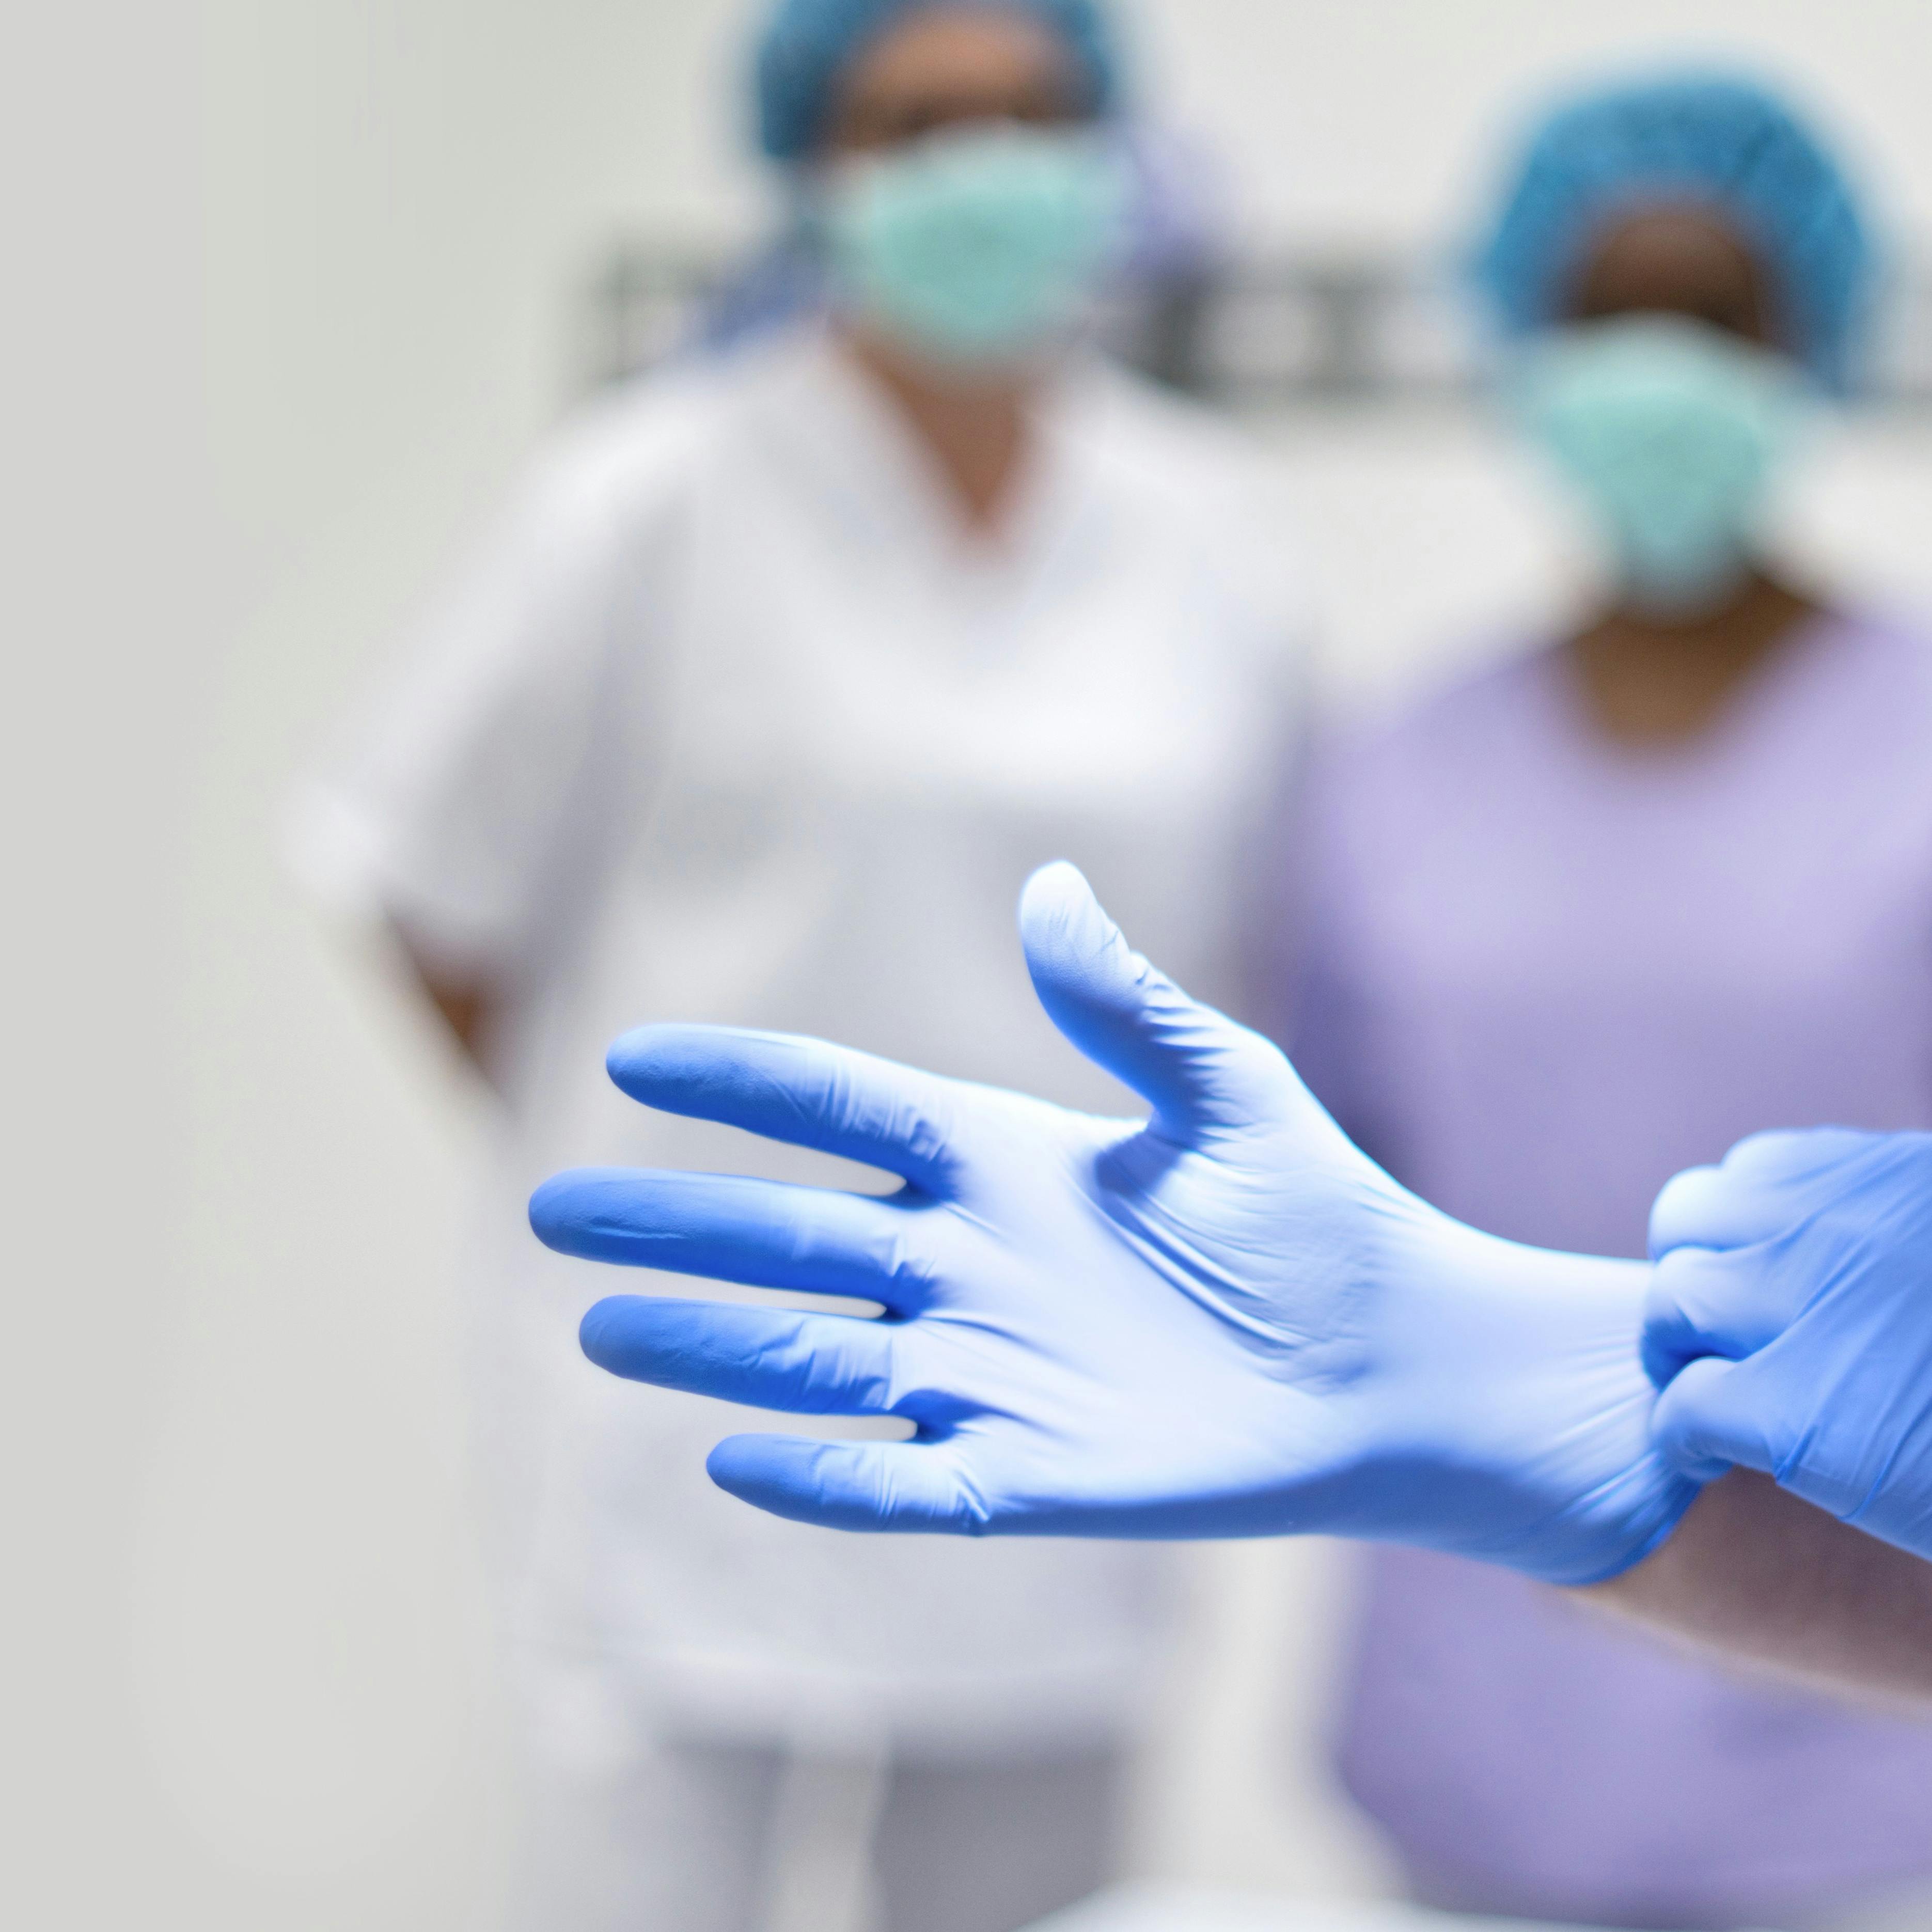 *** ROYALTY FREE - special pris *** Surgeon putting on latex glove. Keywords: adult, one person, background people, care, health, healthcare, medicine, doctor, cropped, medical occupation, hands, surgeon, surgery, hospital, preparation, hygiene, hygienic, care, safety, latex glove, blue, close up, putting on, operating theatre, nurse Modelreleased: YES Property Released: YES